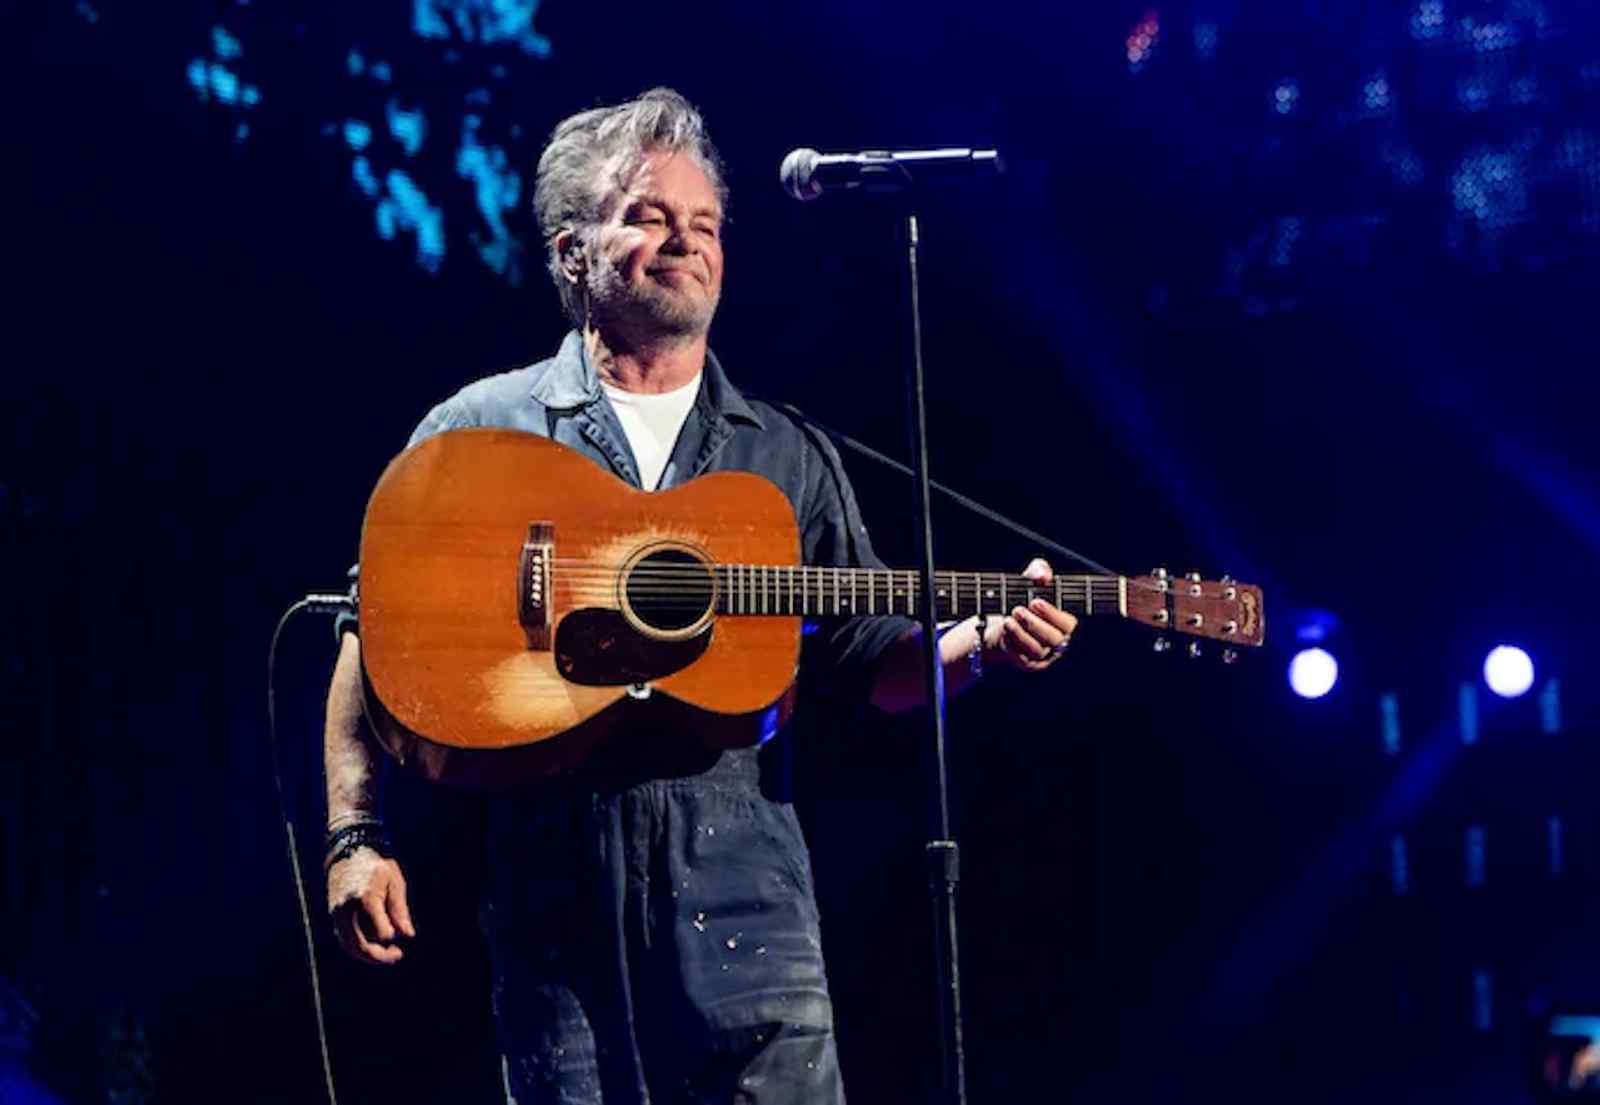 The Washington Post: John Mellencamp Would Like You To Behave. Or "Don't Come To My Show"